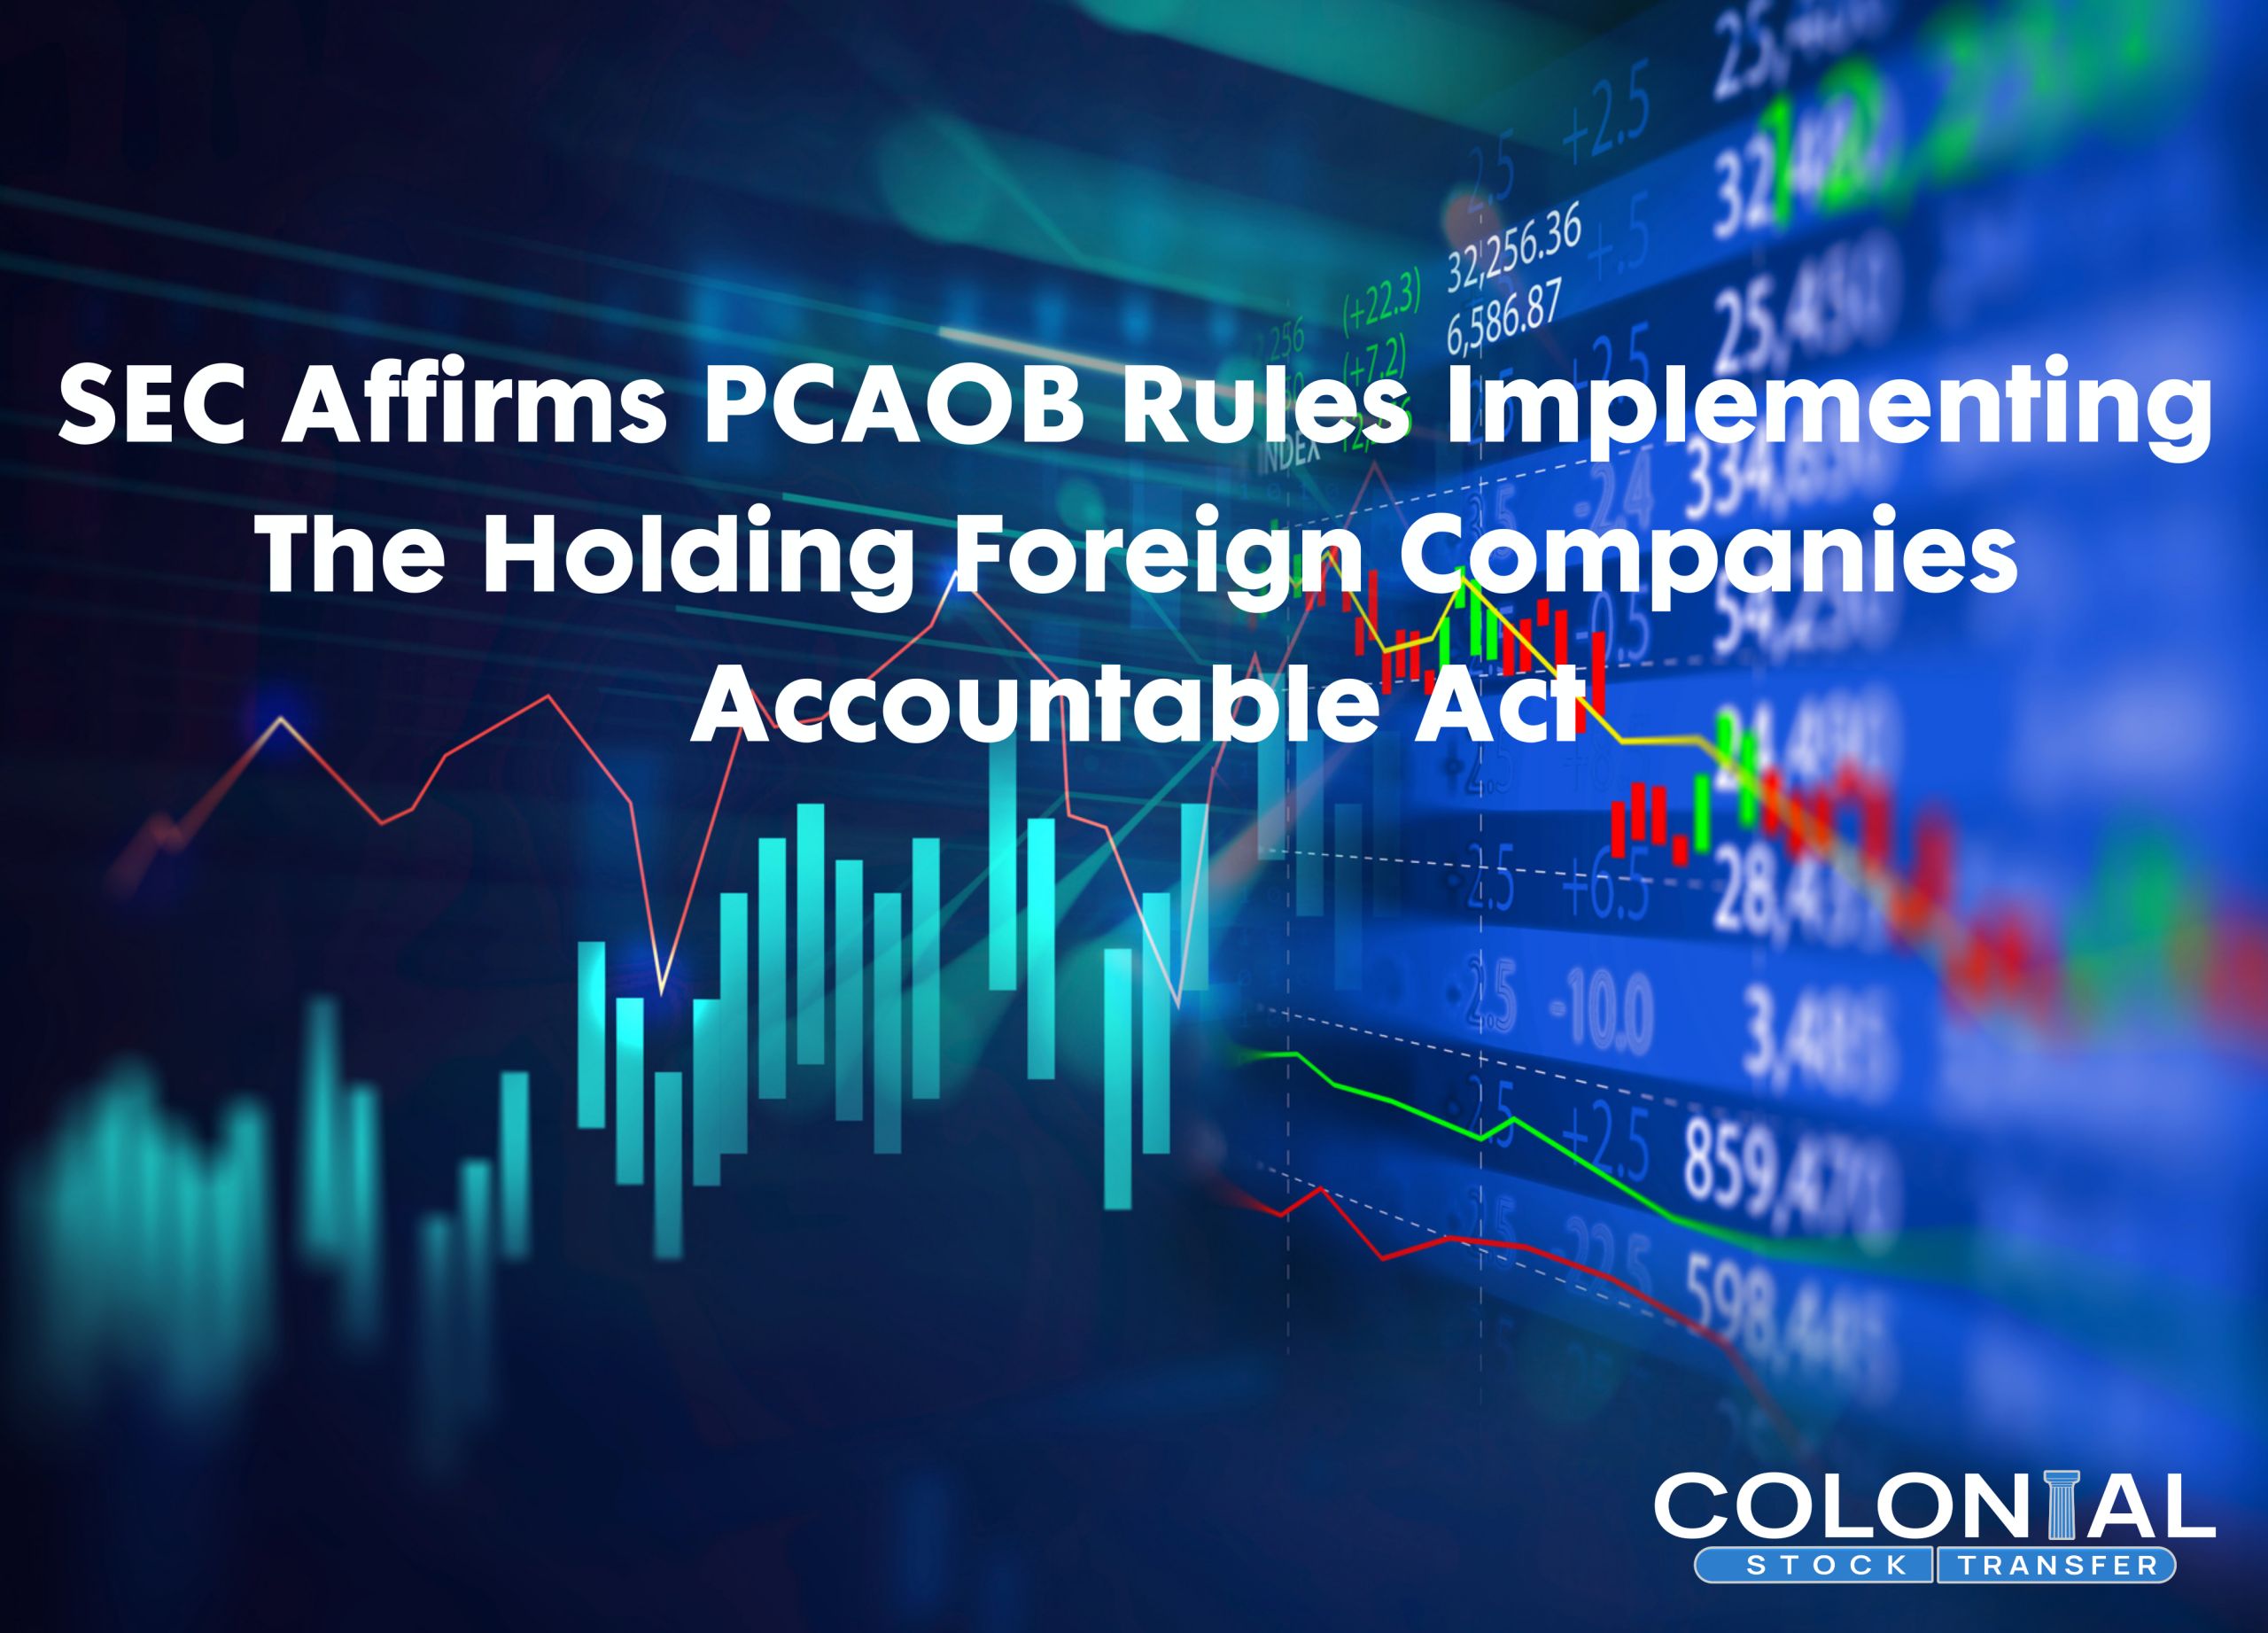 SEC Affirms PCAOB Rules Implementing The Holding Foreign Companies Accountable Act